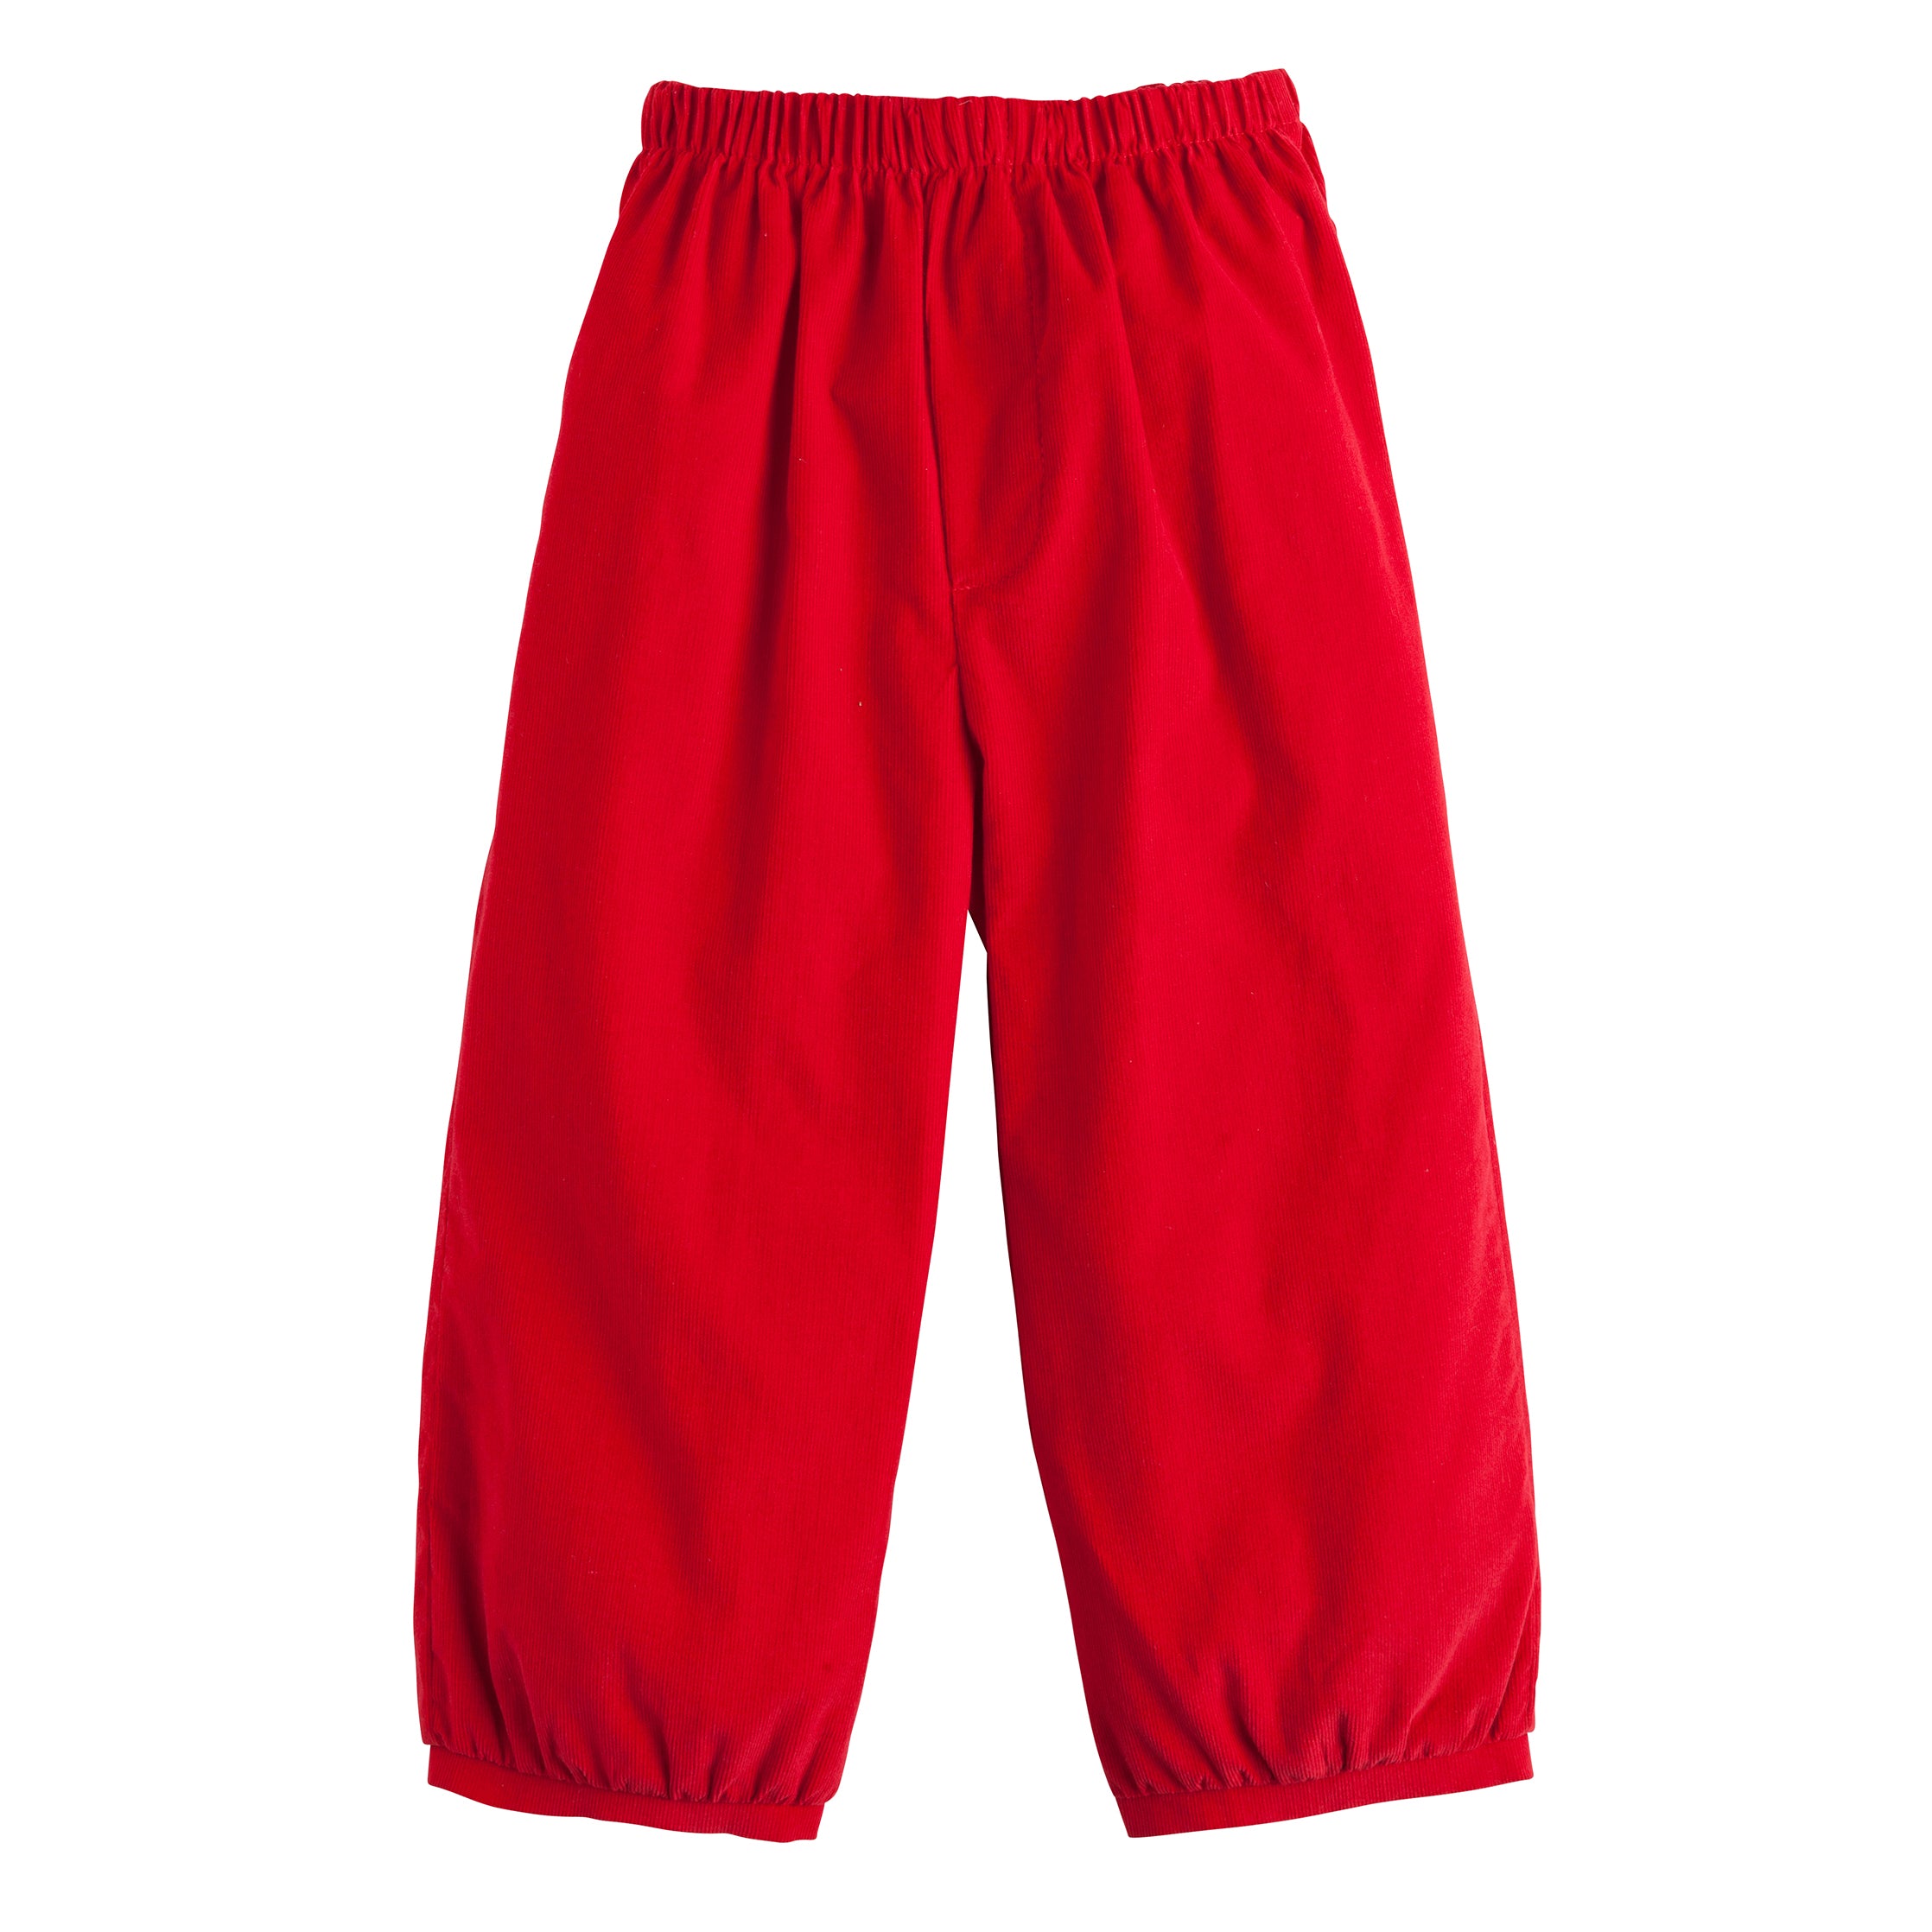 Banded Pant - Red Corduroy